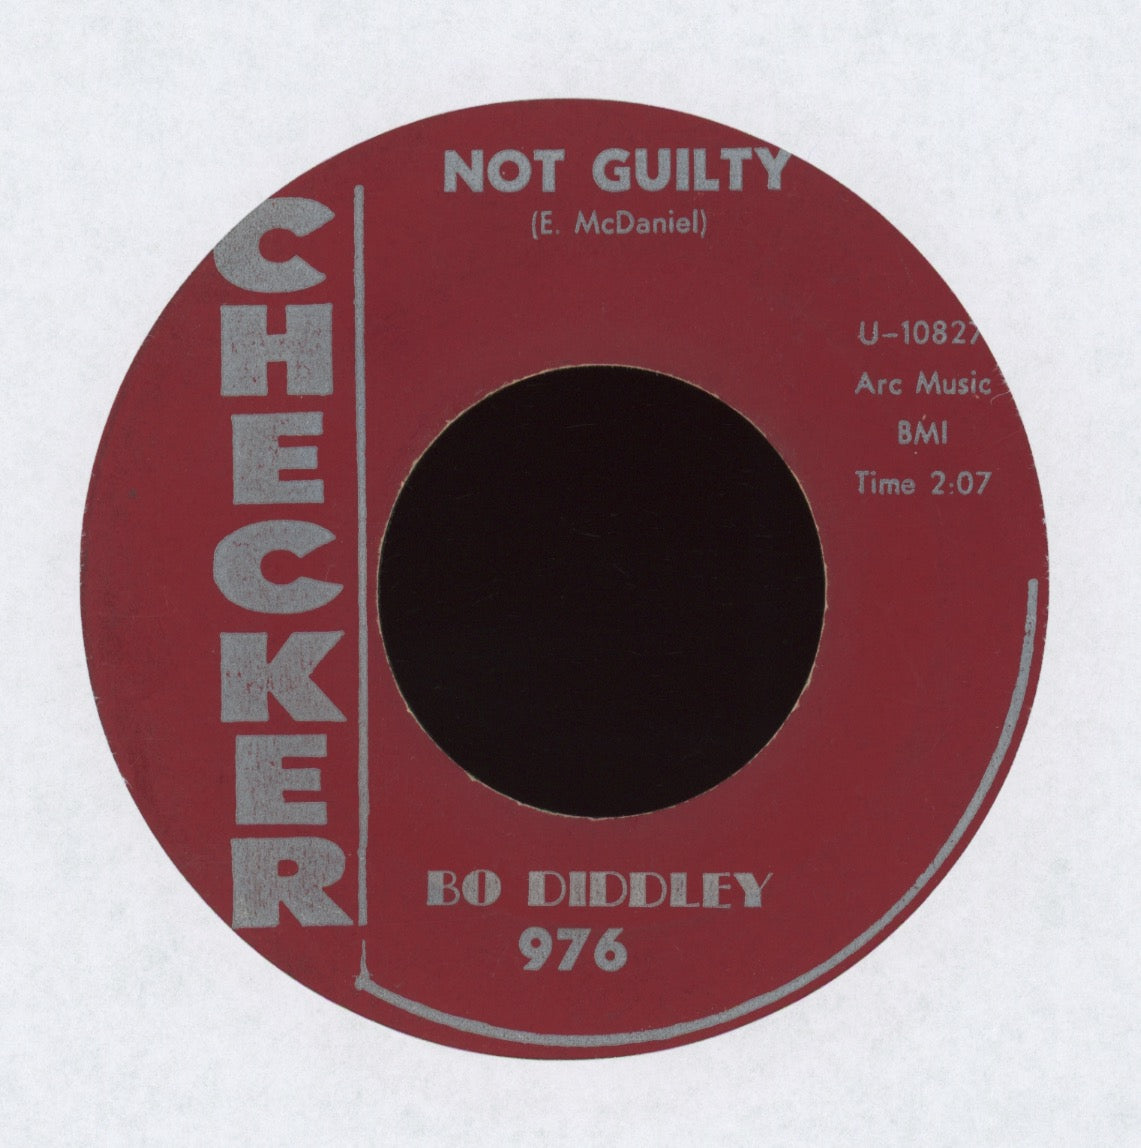 Bo Diddley - Not Guilty on